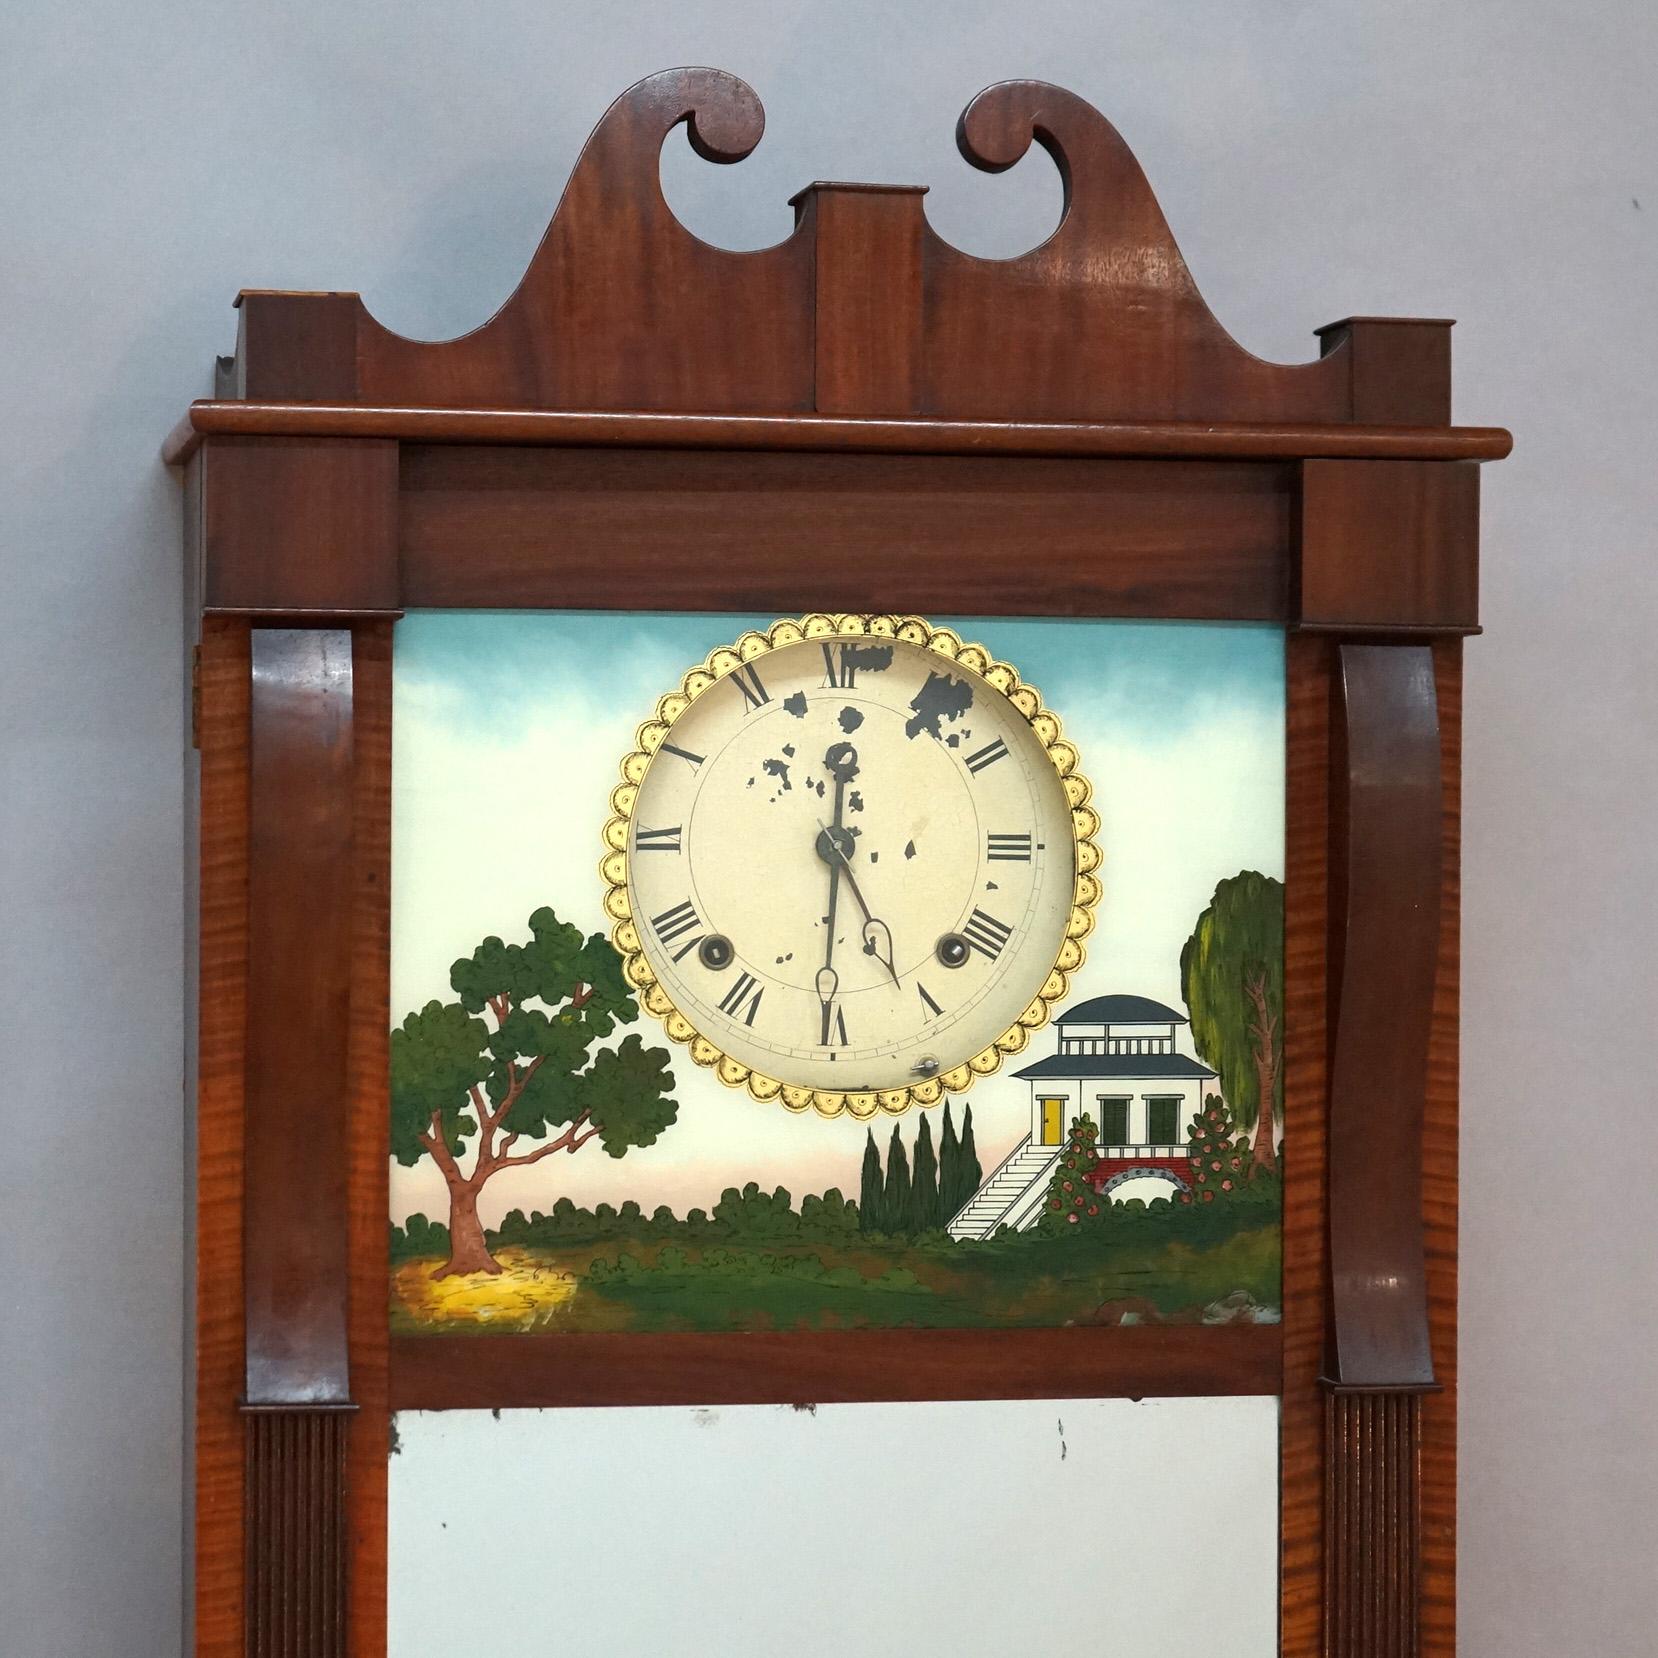 Large Antique American Empire Wall Clock with Mahogany Case & Hand Painted Eglomise Panels  C1840

Measures - 53.5